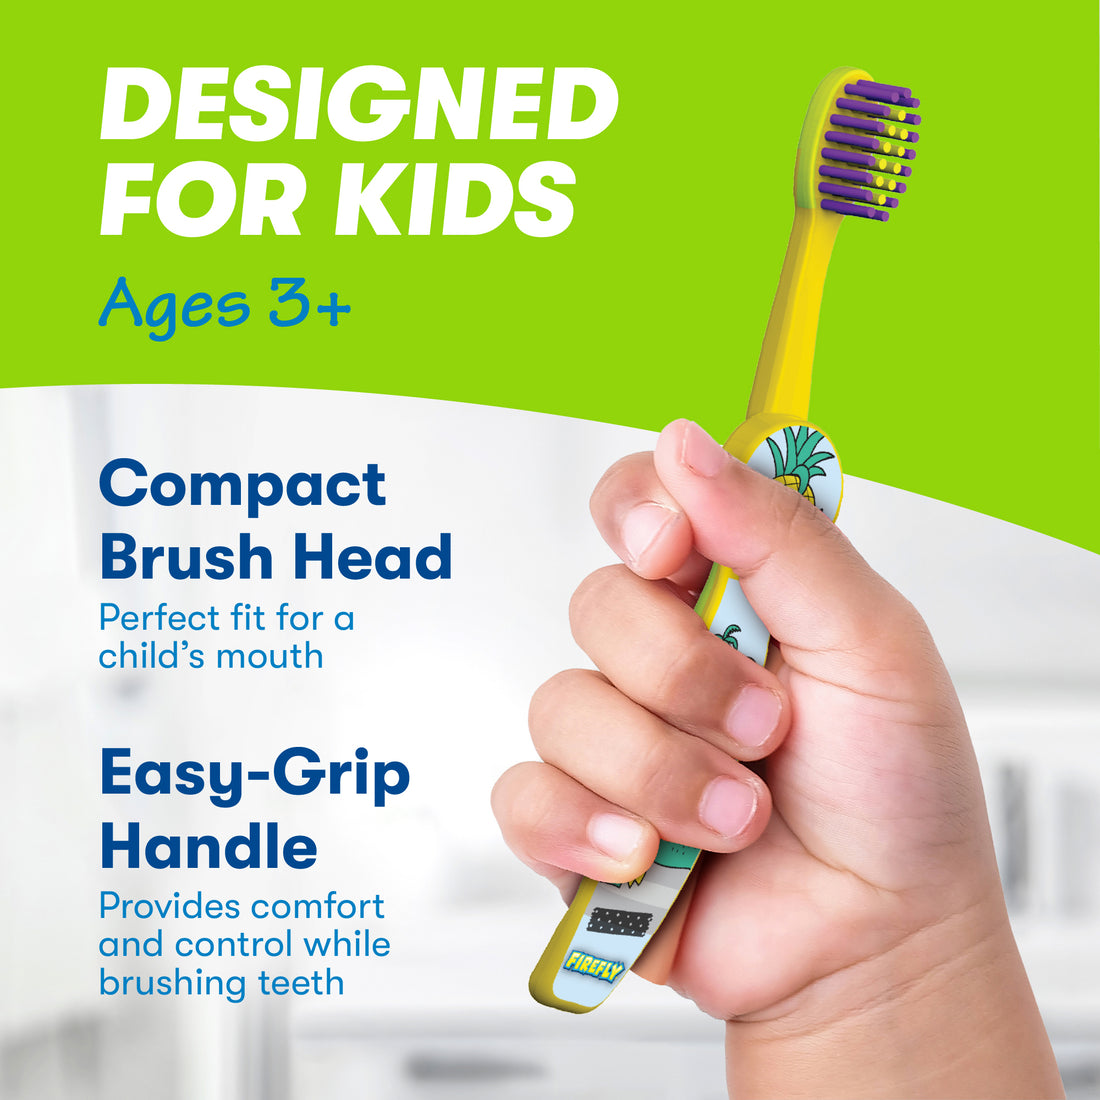 Child holding Firefly Sloths Circle Soft Toothbrush, Designed for kids ages 3+, compact brush head perfect fit for a child&